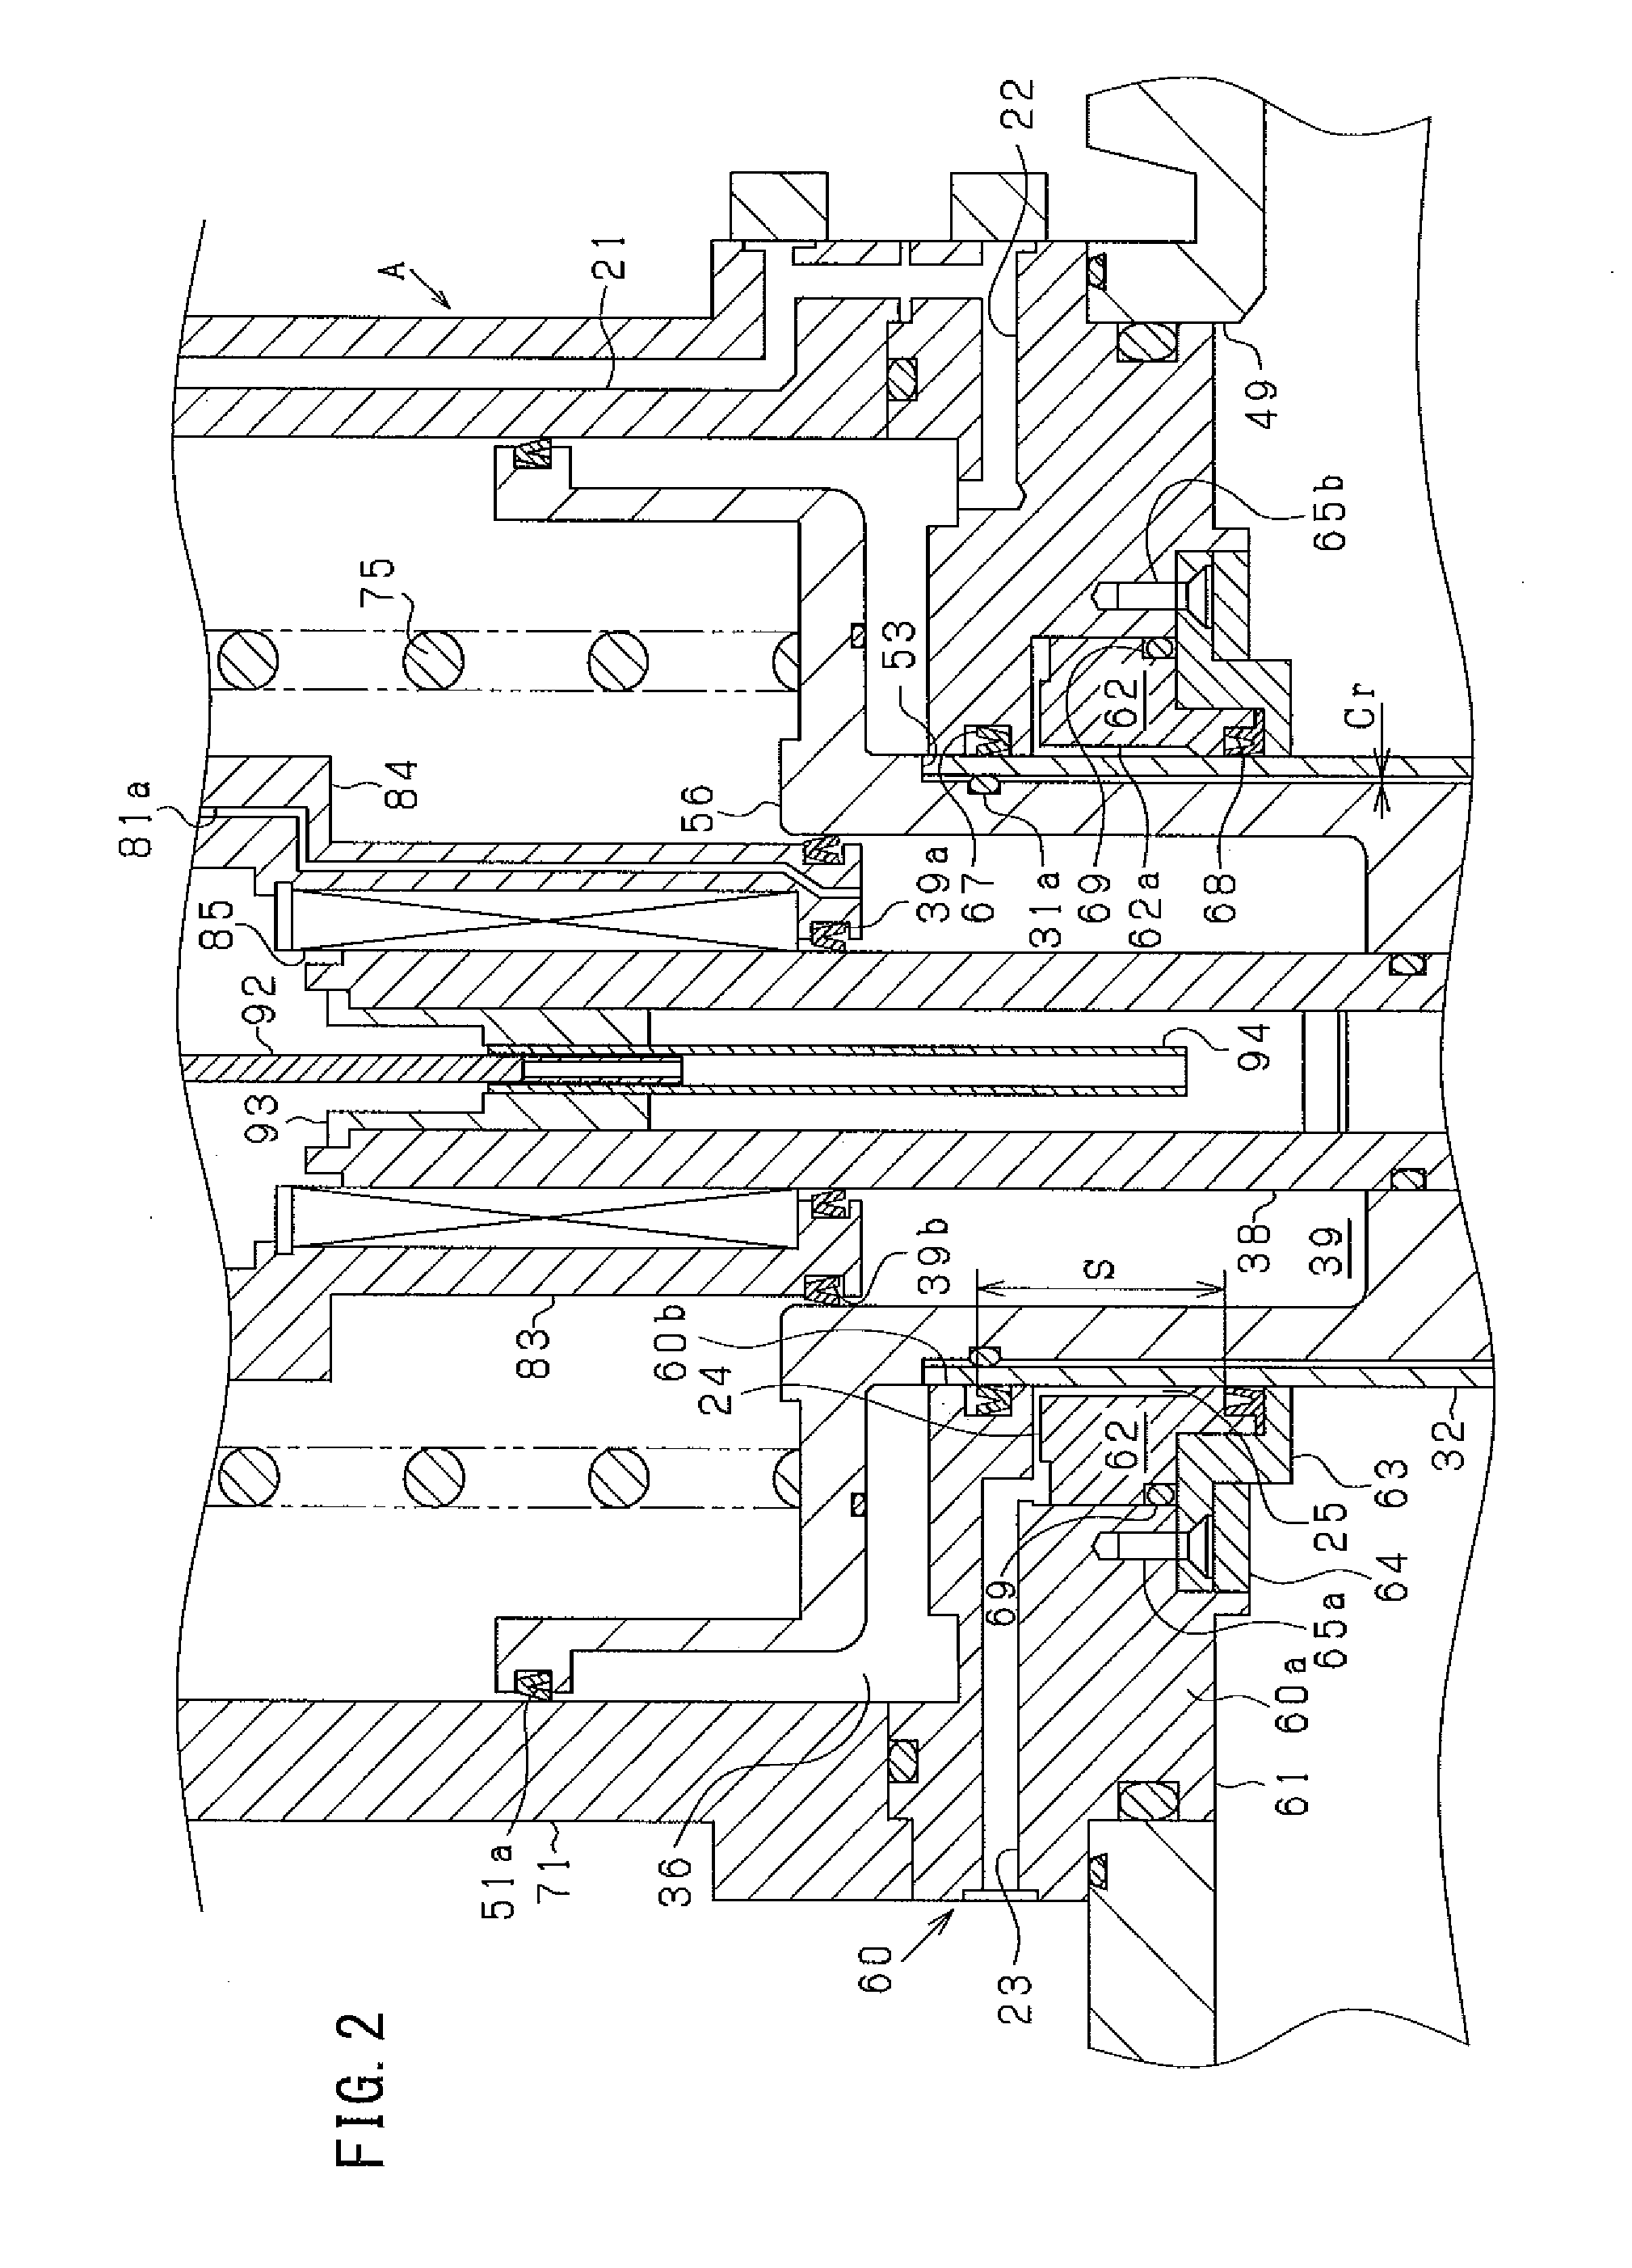 Linear actuator and vacuum control device